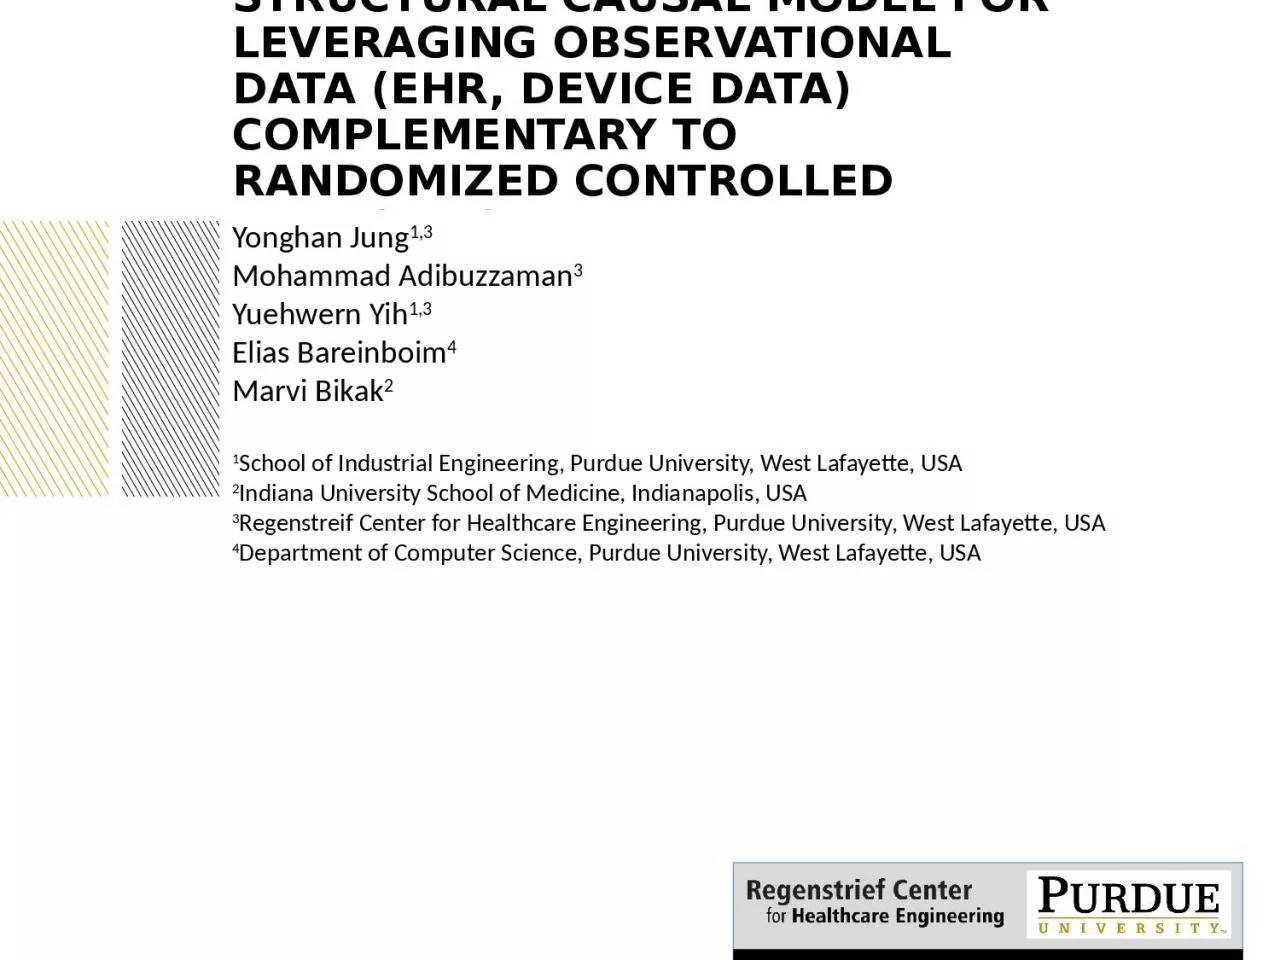 Structural causal model for leveraging observational data (EHR, Device data) complementary